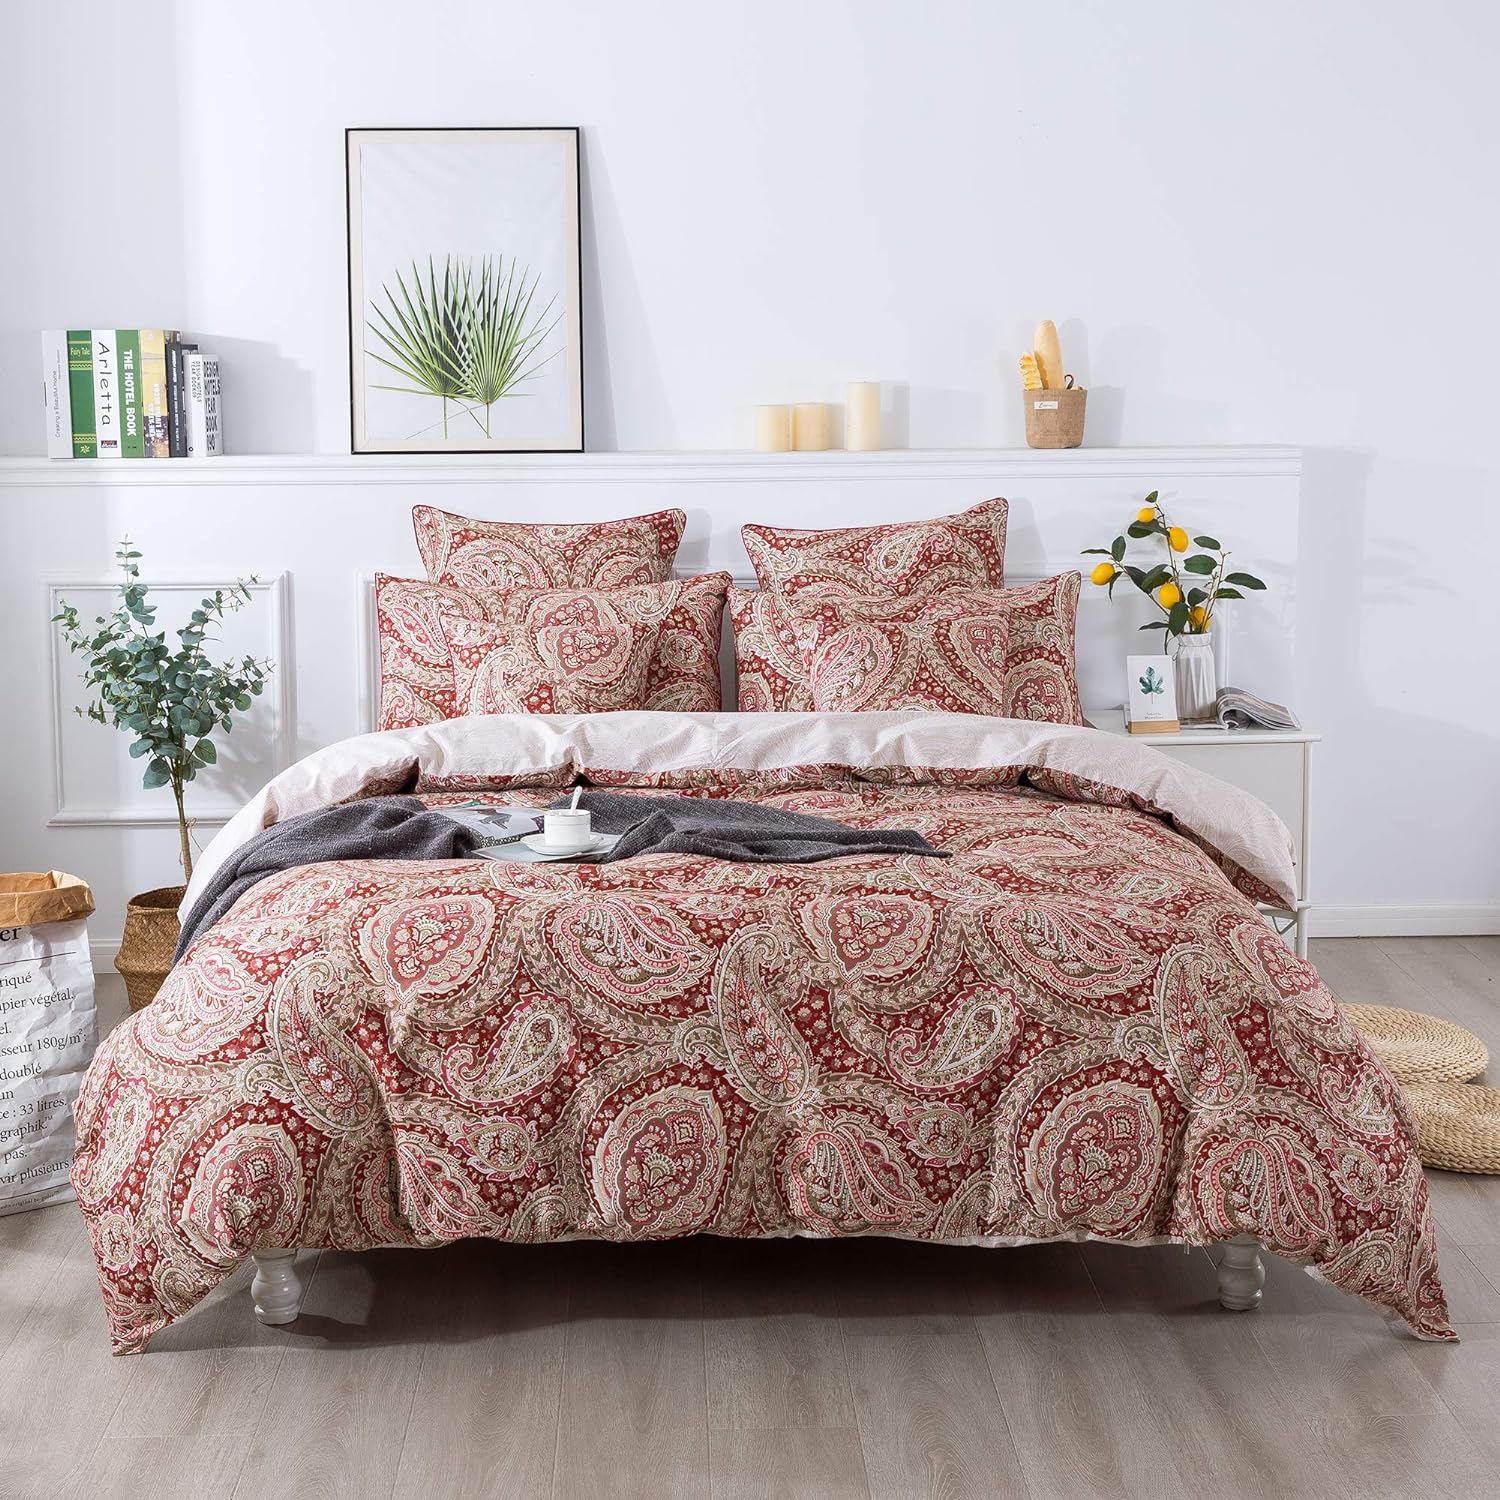 FADFAY Paisley Duvet Cover Set Twin Red and Beige Reversible Paisley Floral Bedding 100% Cotton Ultra Soft Bedding Set with Hidden Zipper Closure 3 Pieces, 1Duvet Cover & 2Pillowcases, Twin Size